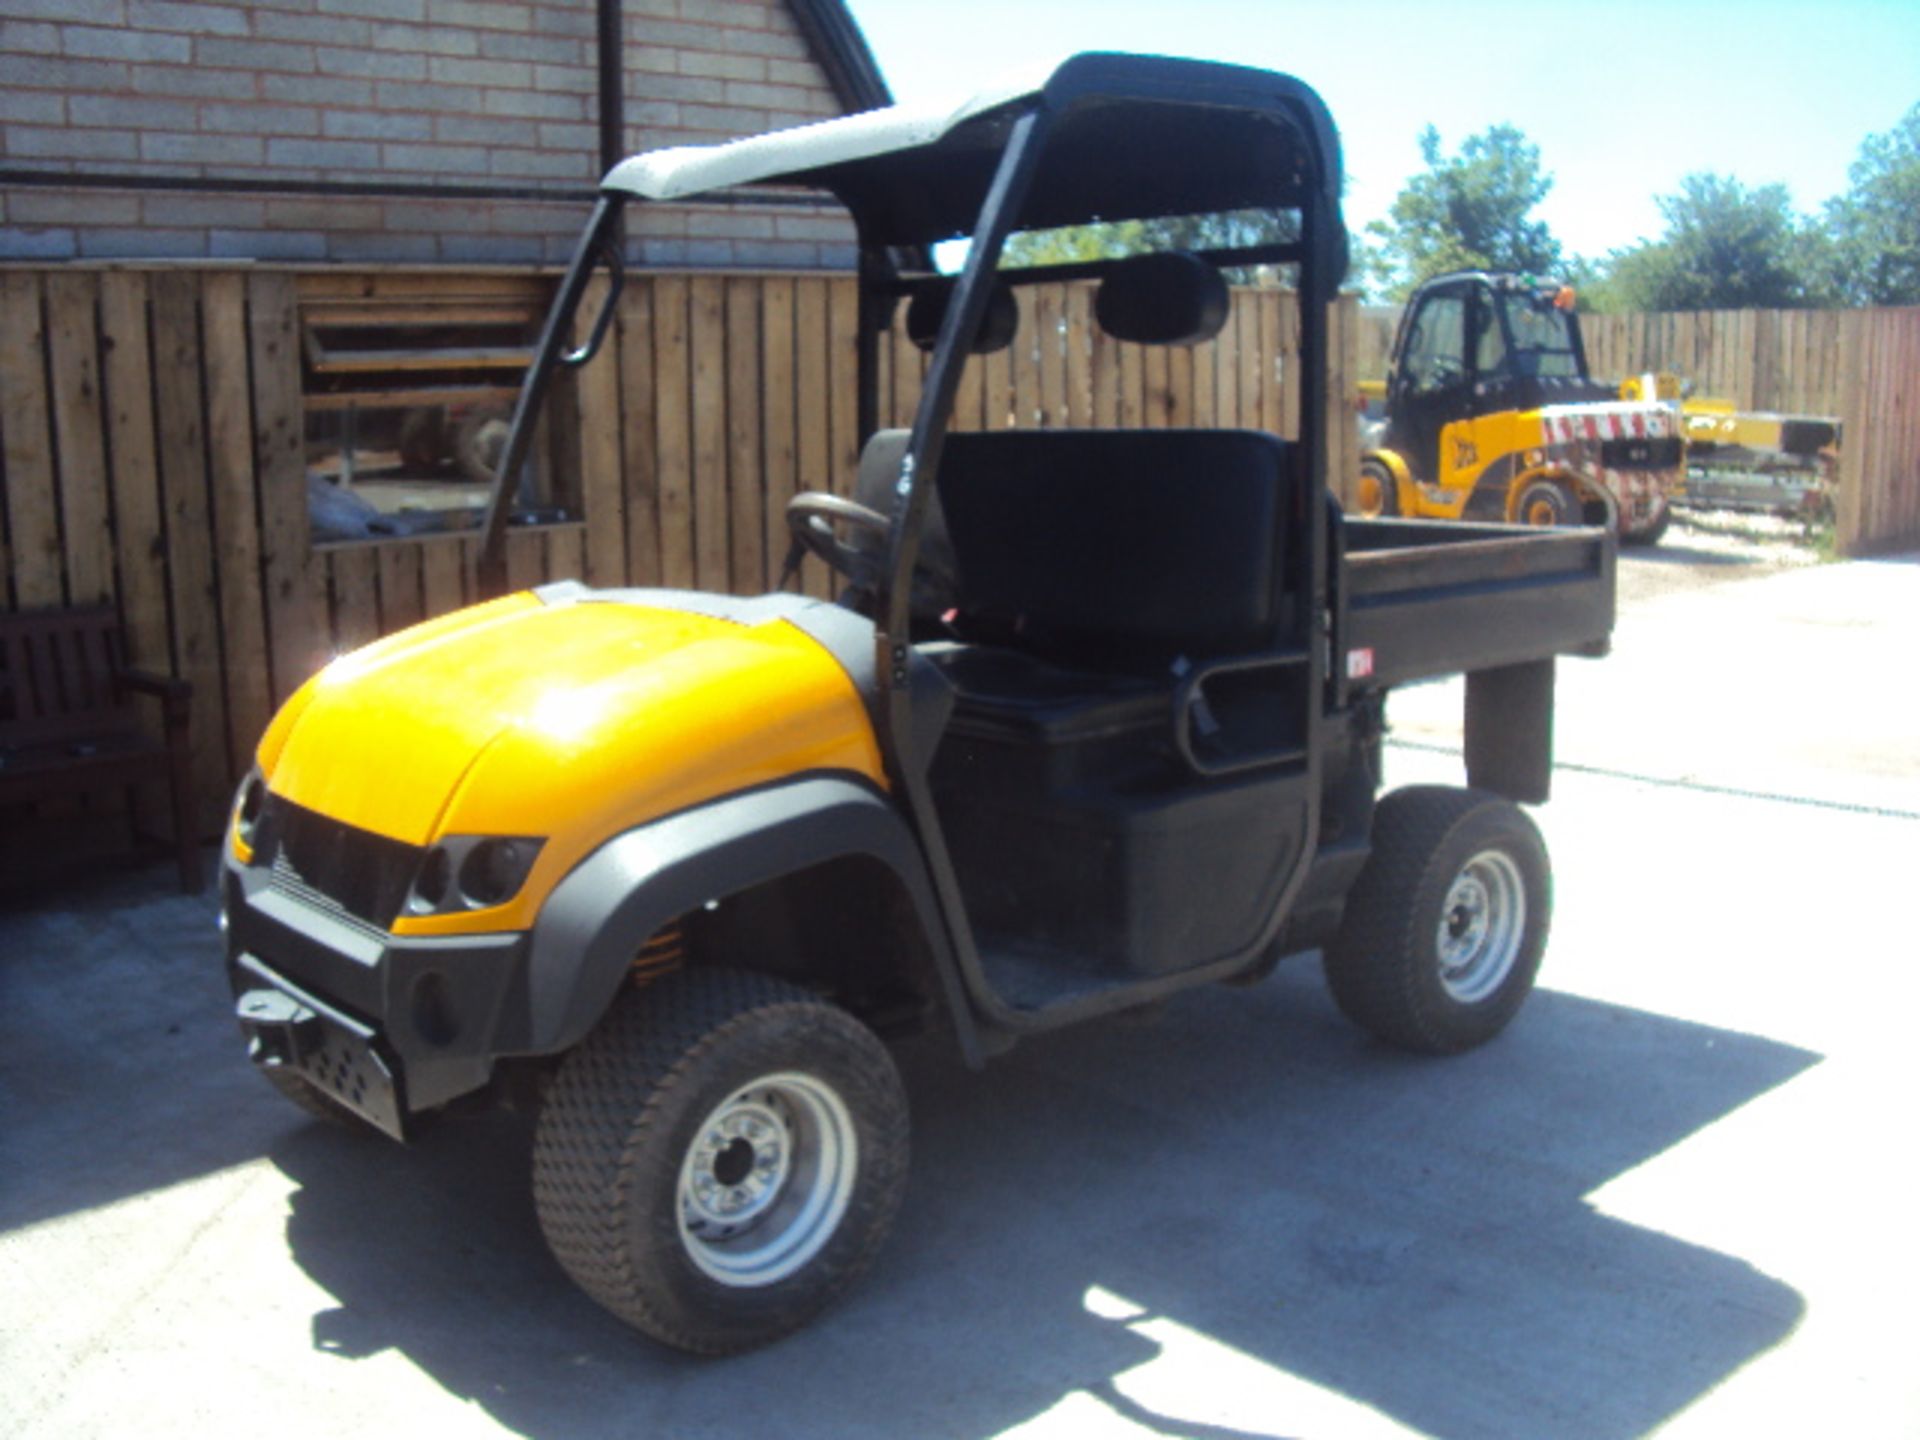 2012 JCB WORKMAX 4x4 diesel driven utility tipper S/n: E01630030 (223 recorded hours) with manual